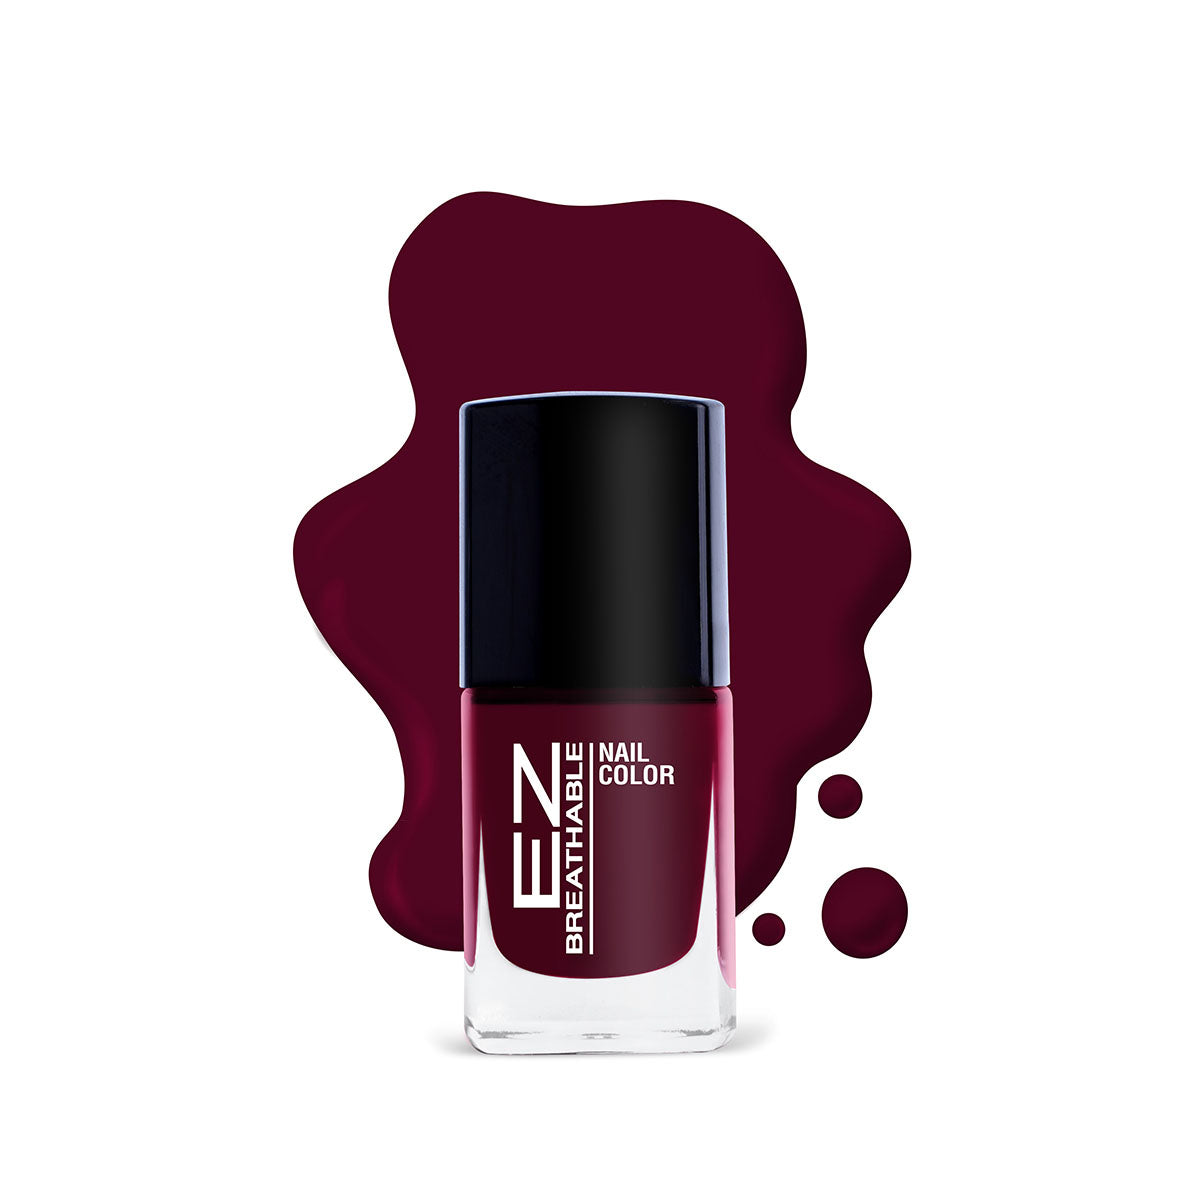 Buy Iba Breathable Nail Colour Online at Best Price of Rs 250 - bigbasket